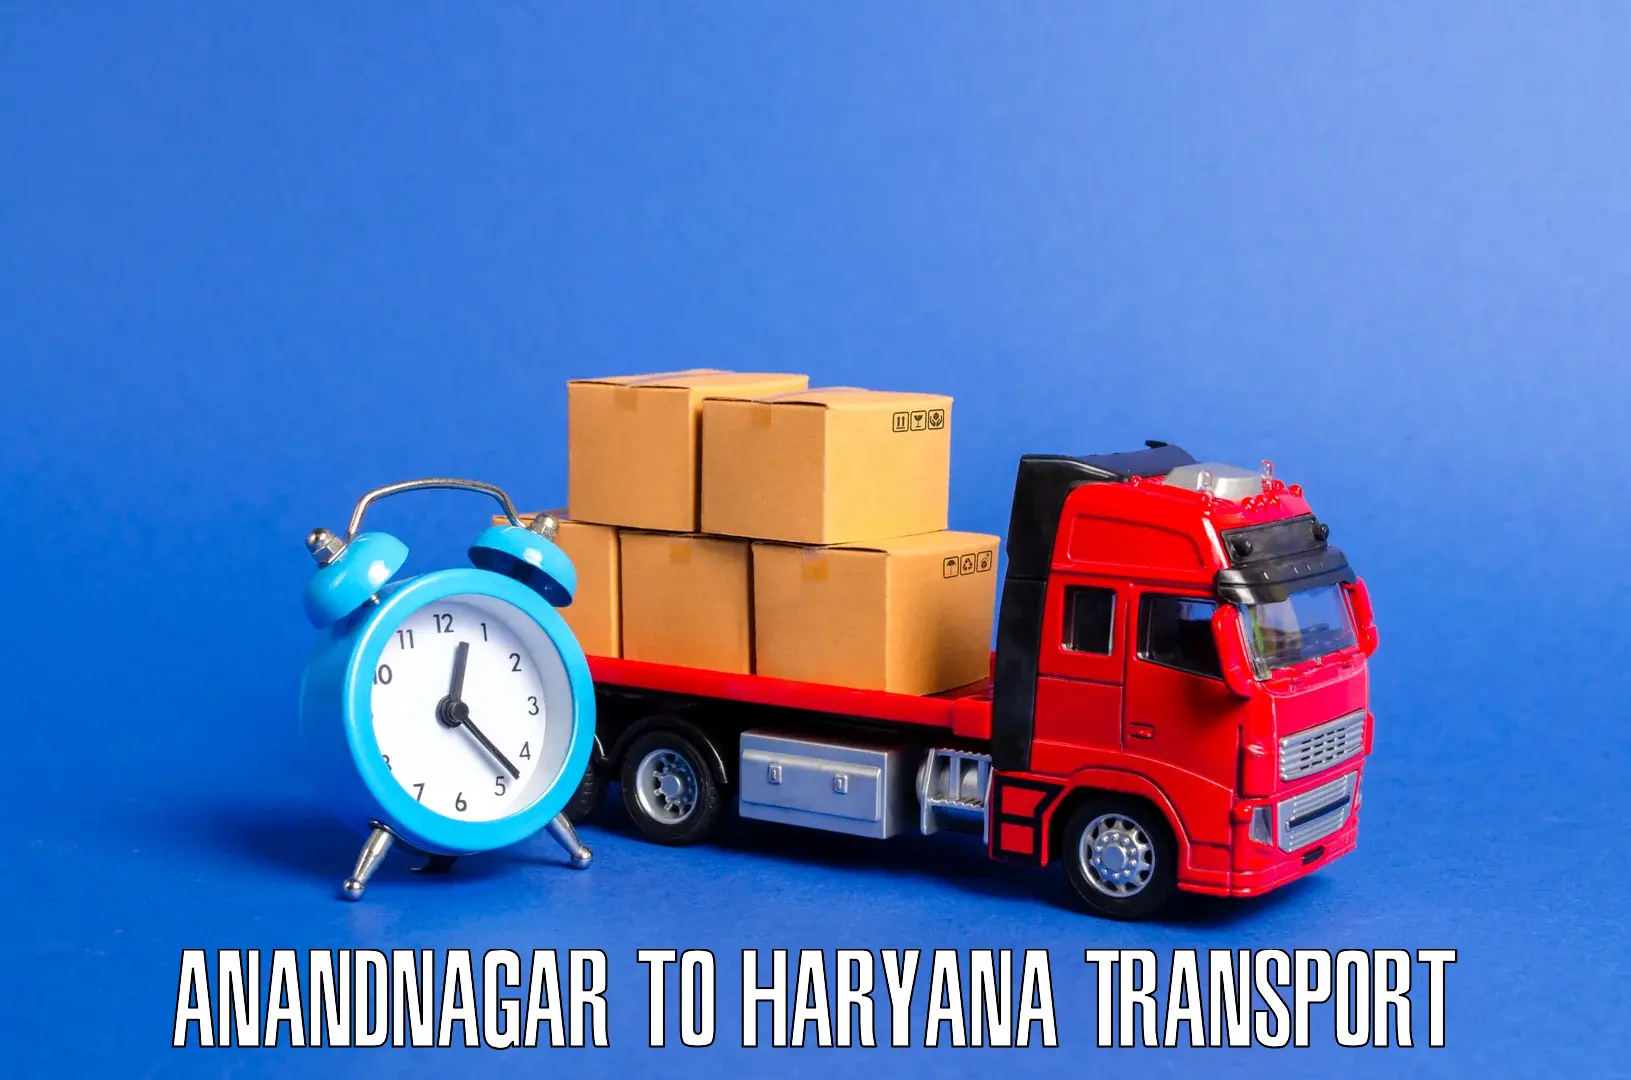 Nearby transport service Anandnagar to Pinjore